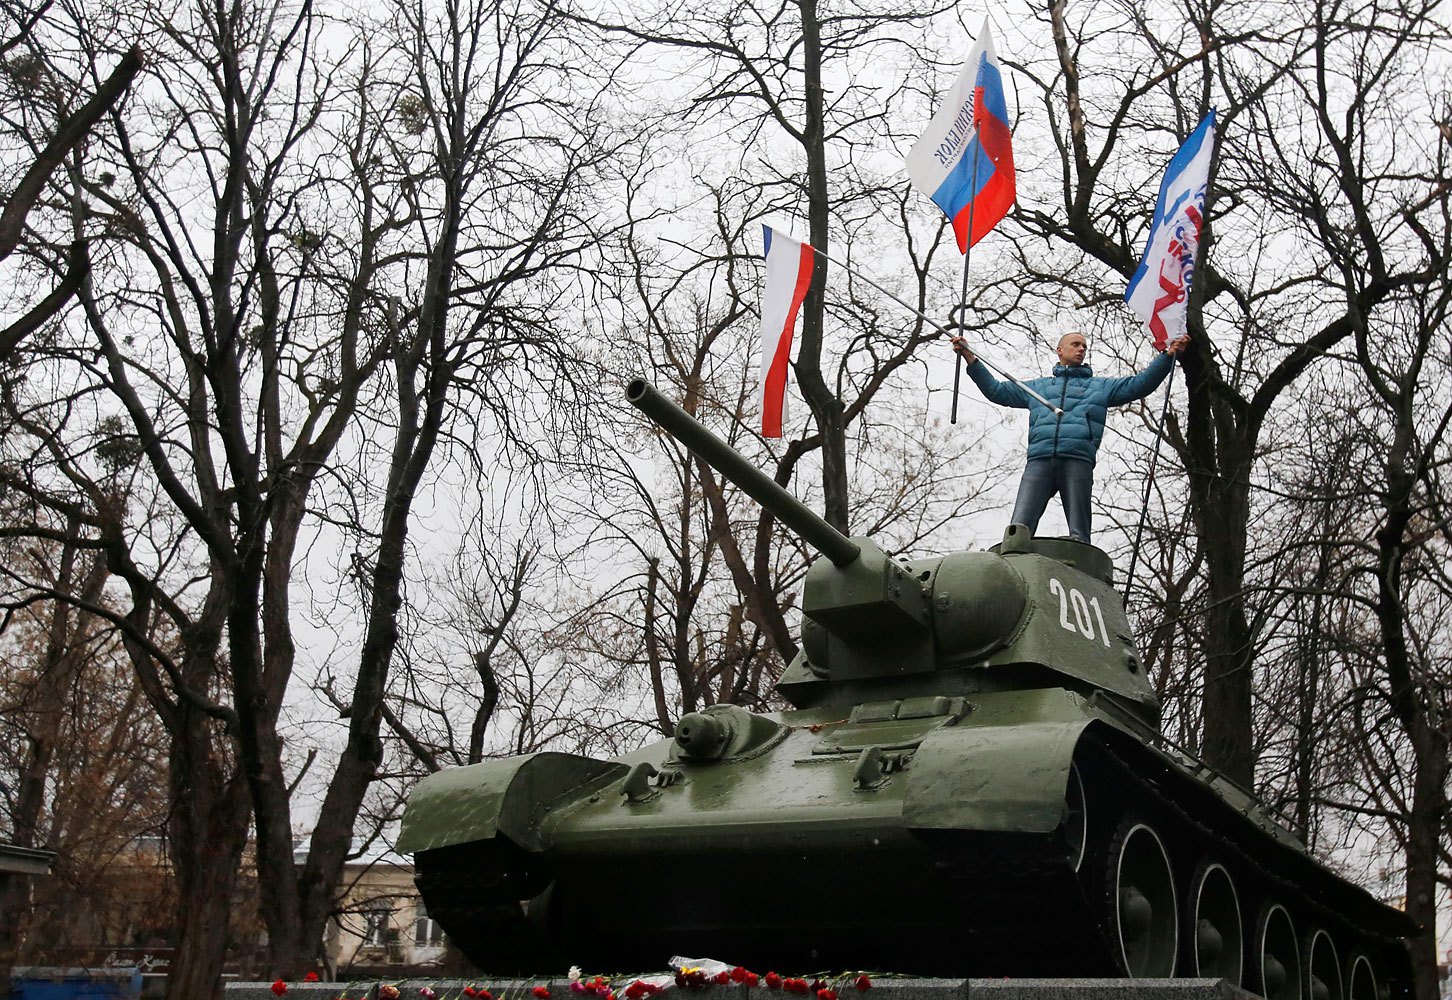 A Pro-Russian demonstrator waves Russian and Crimea flags atop an old Soviet Army tank during a protest in front of a local government building in Simferopol, Feb. 27, 2014.